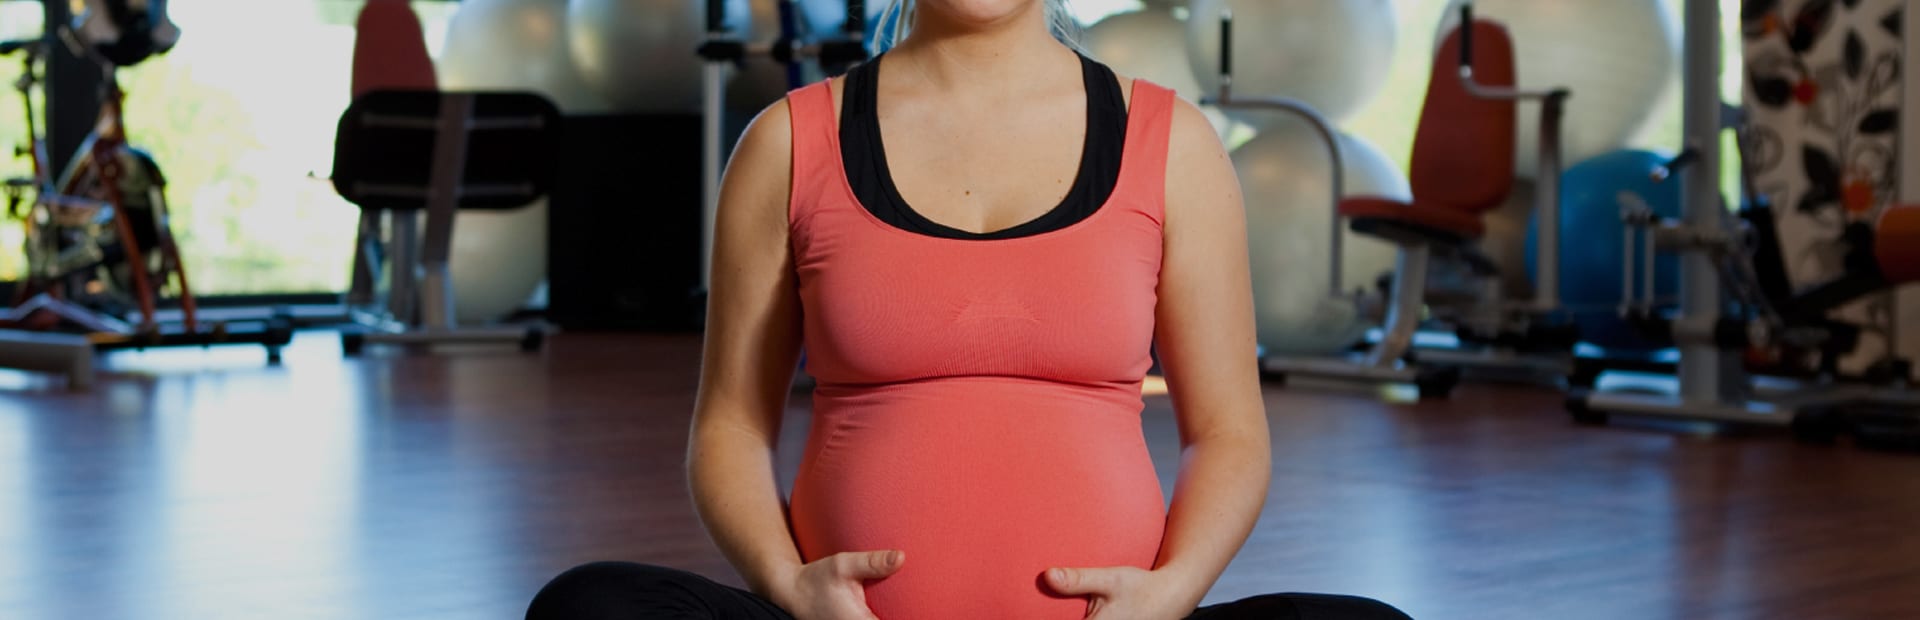 Pregnant client sitting in an exercise studio